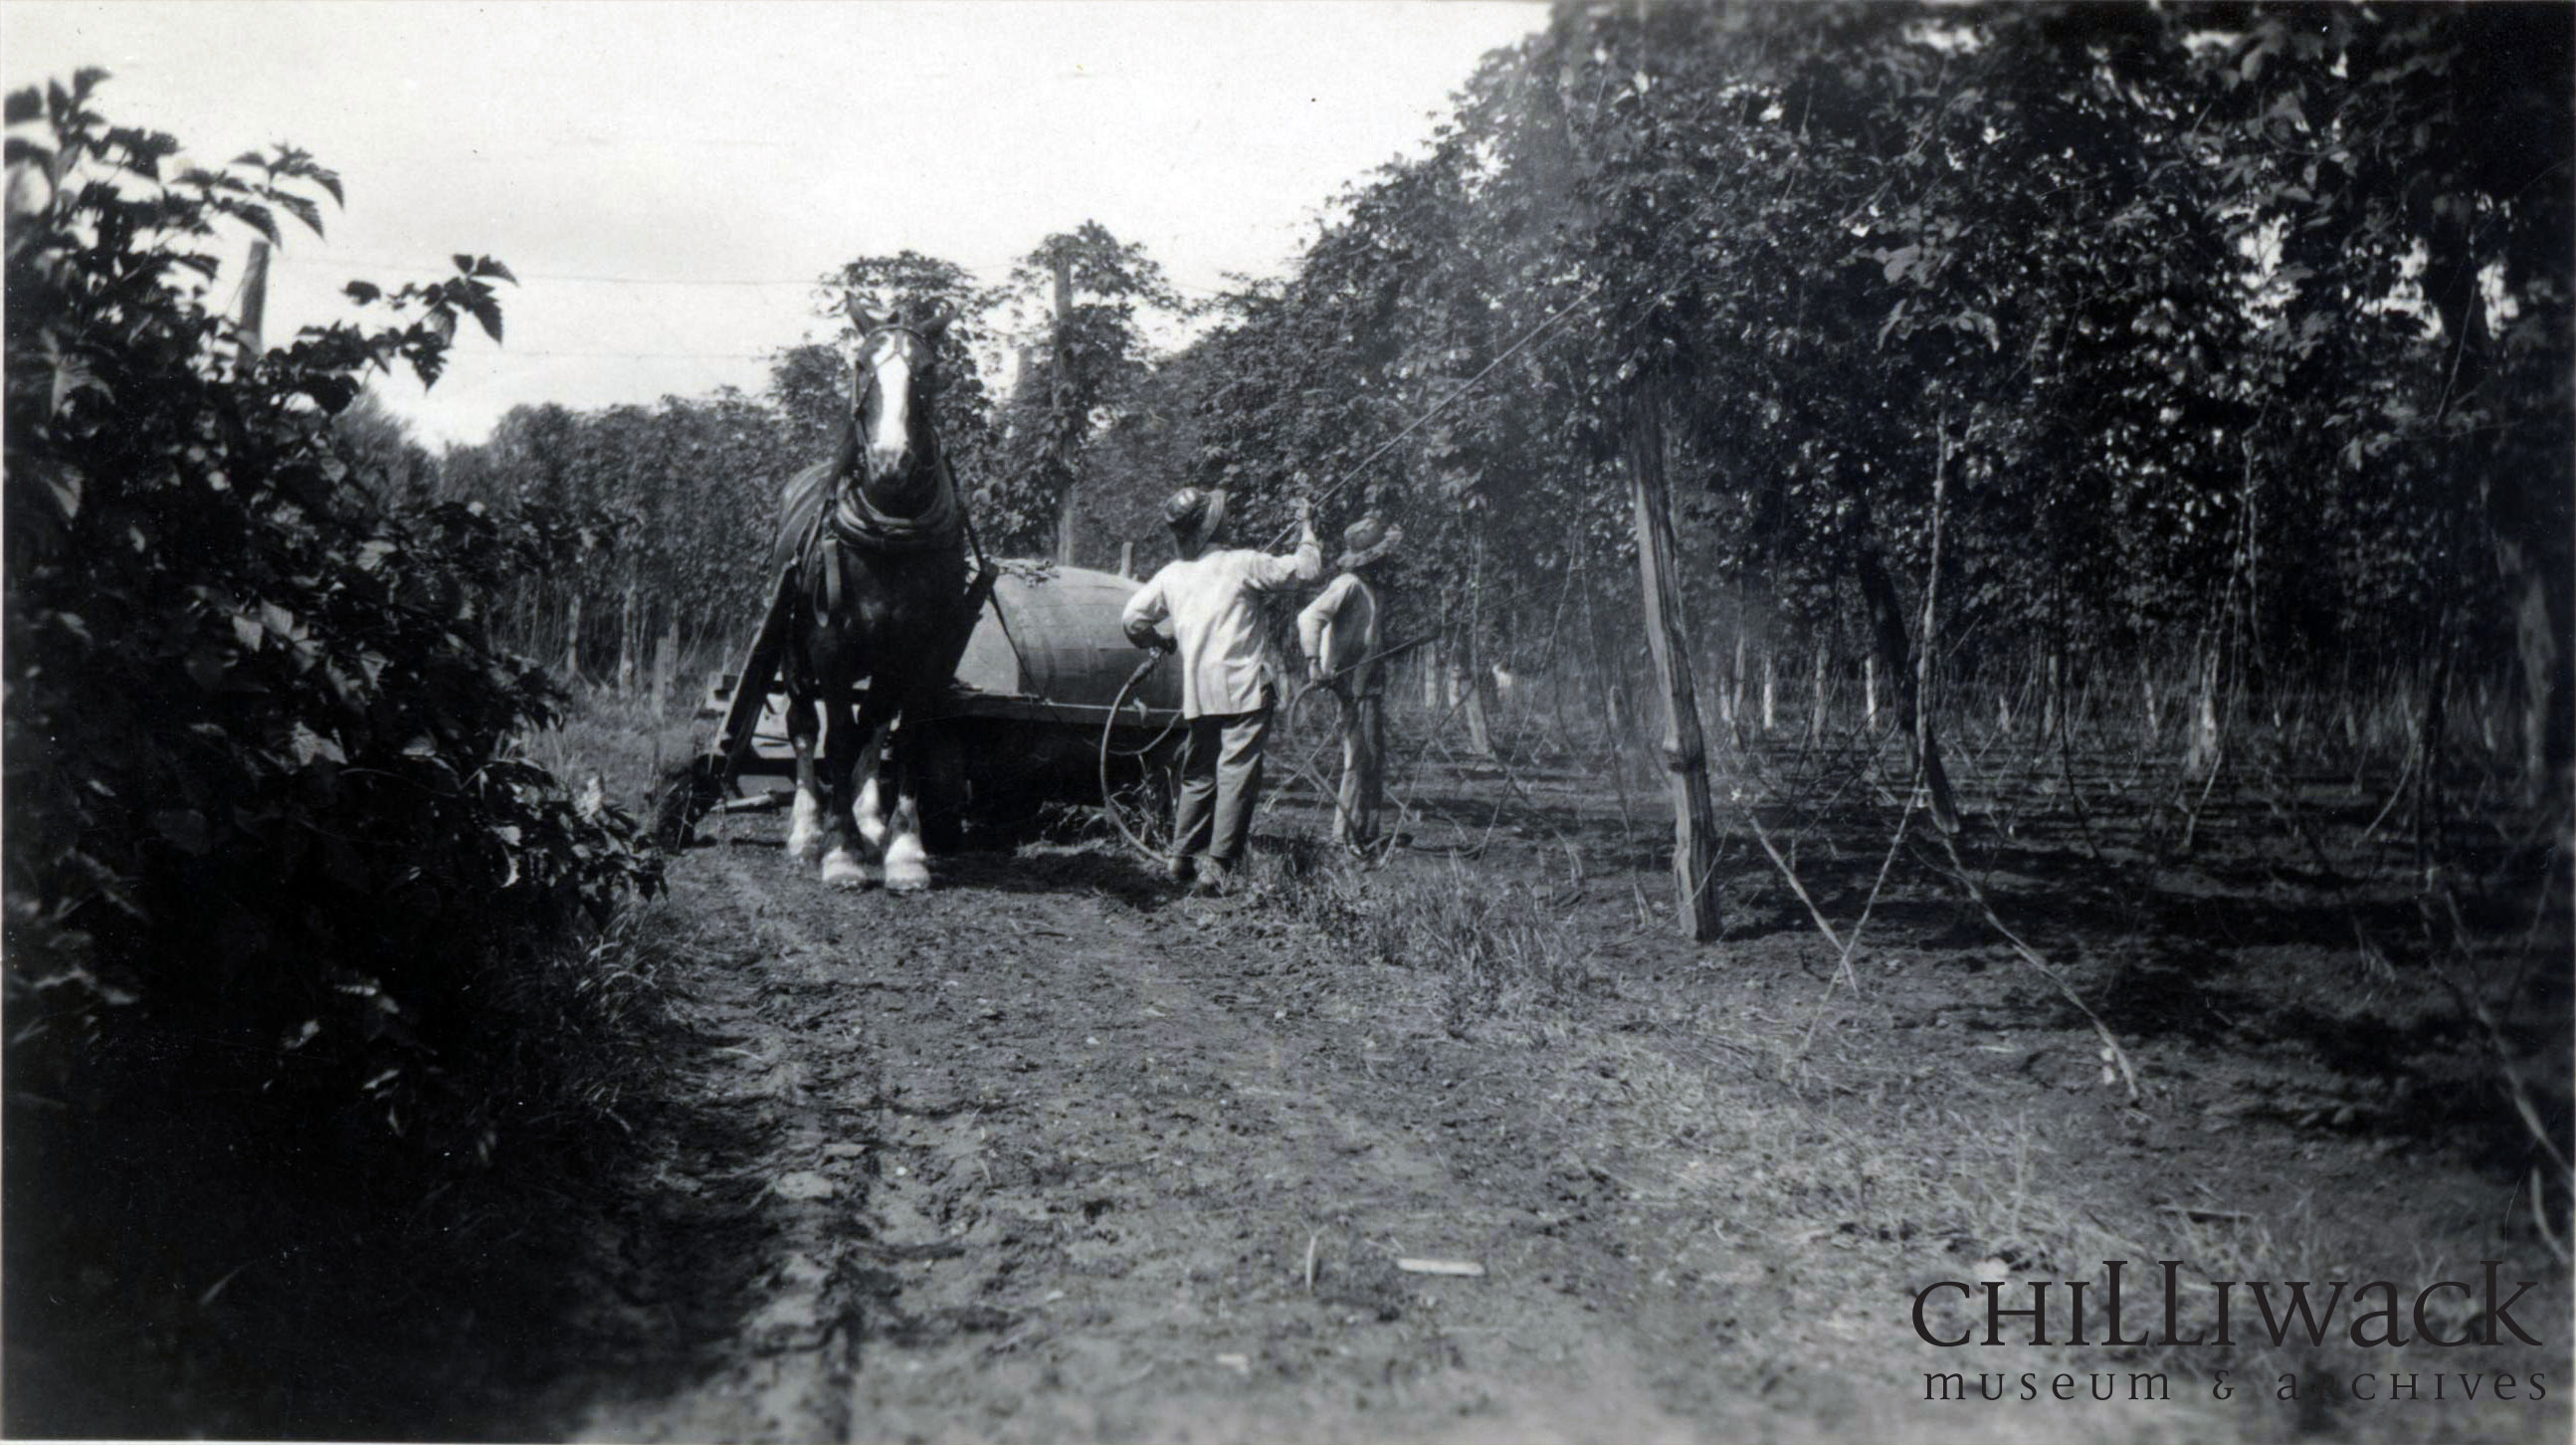 Black and white photograph of two men spraying hops in a field with horse and wagon